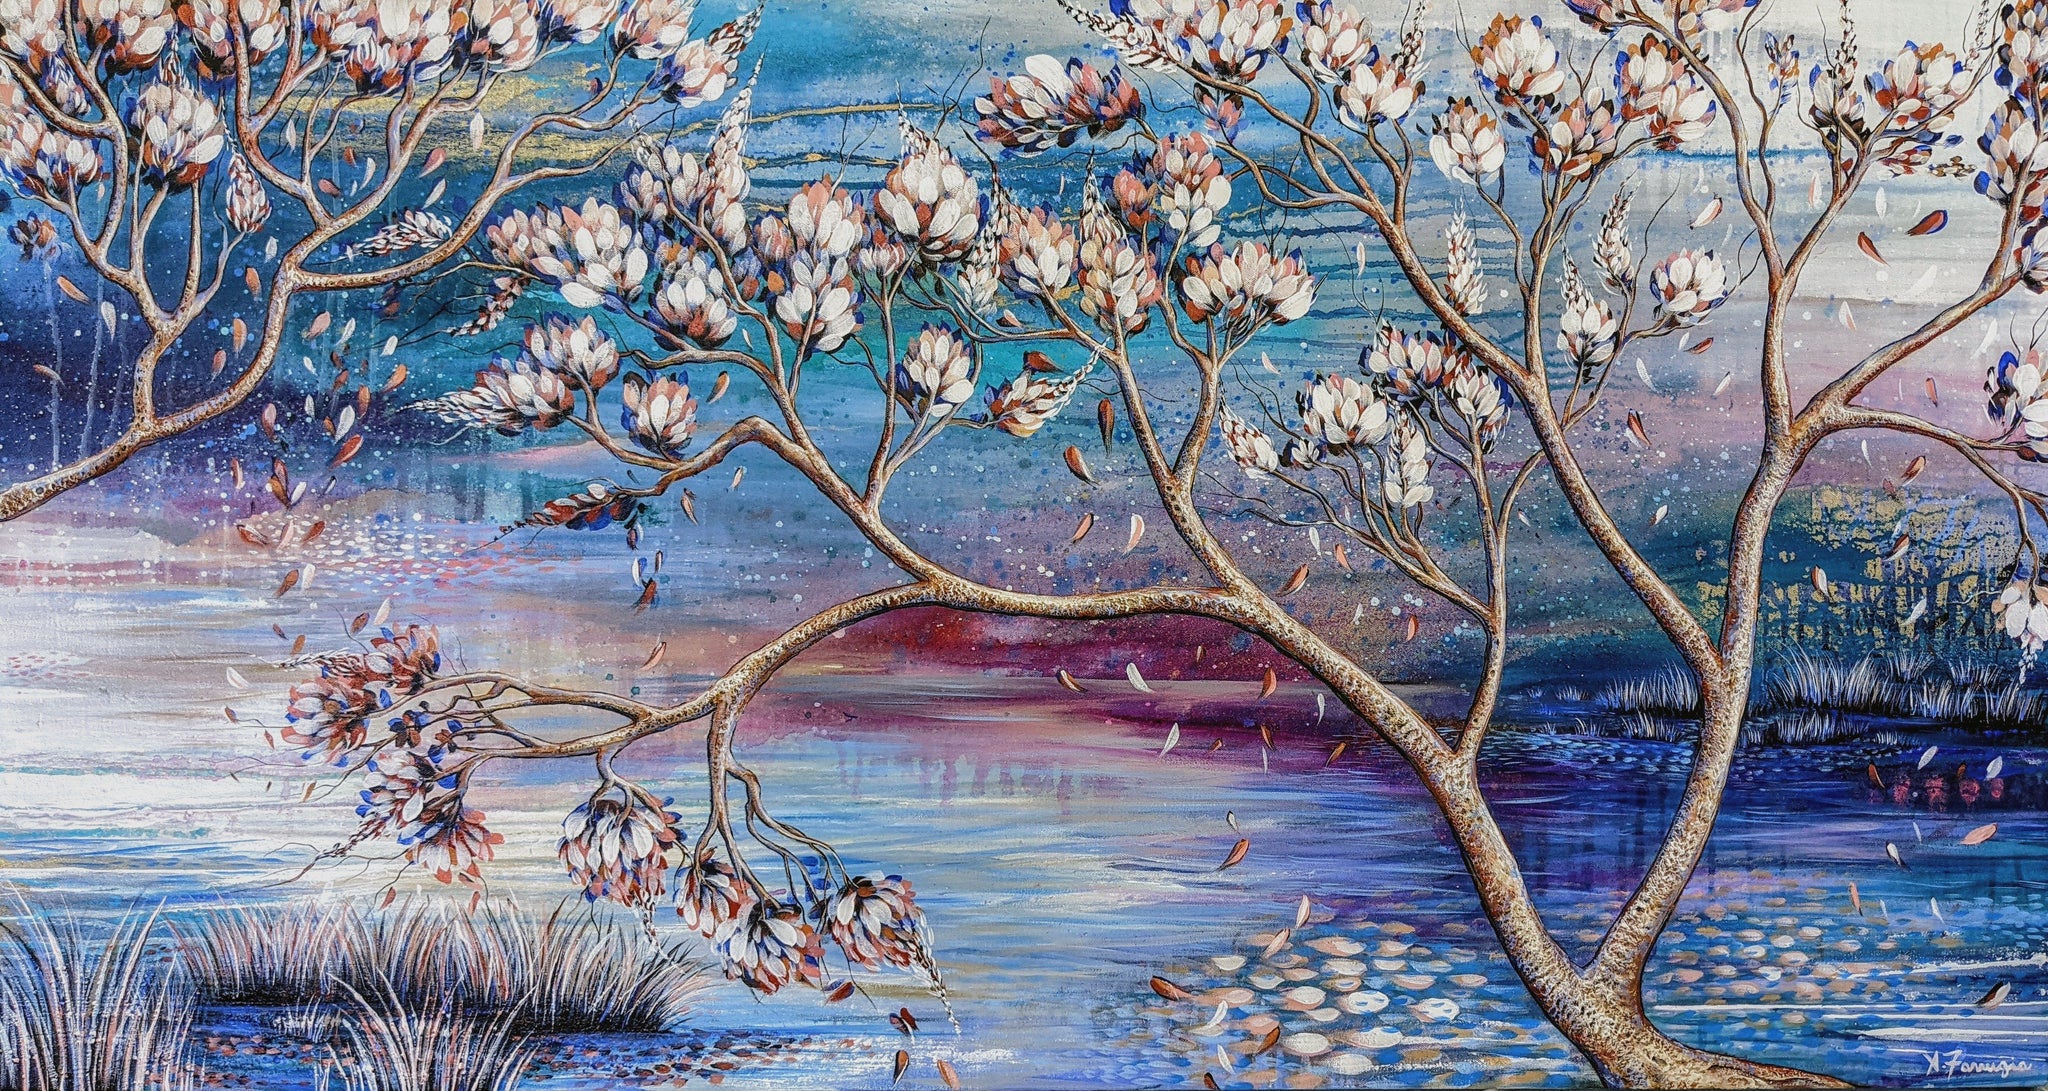 "Tranquility Amongst The Blossoms" SOLD